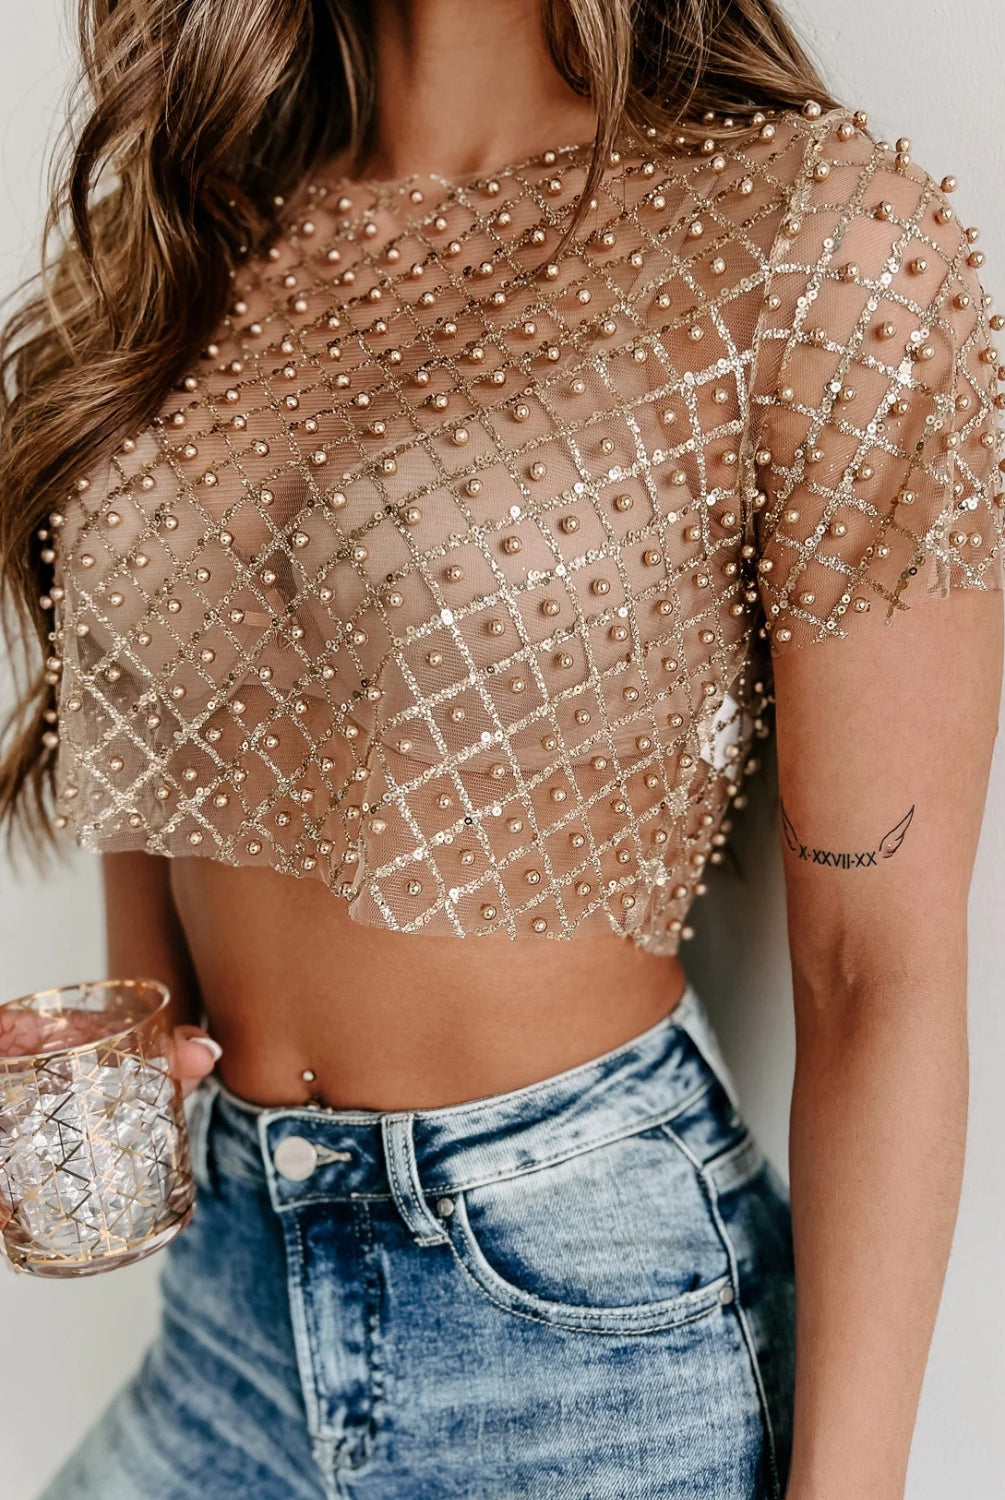 A close-up of a woman wearing a sheer, short-sleeved blouse embellished with beads and sequins in a grid pattern, paired with high-waisted blue jeans. She's holding a glass in one hand and a cream-colored chain strap purse in the other. The blouse is a glamorous, cropped design that reveals the midriff.